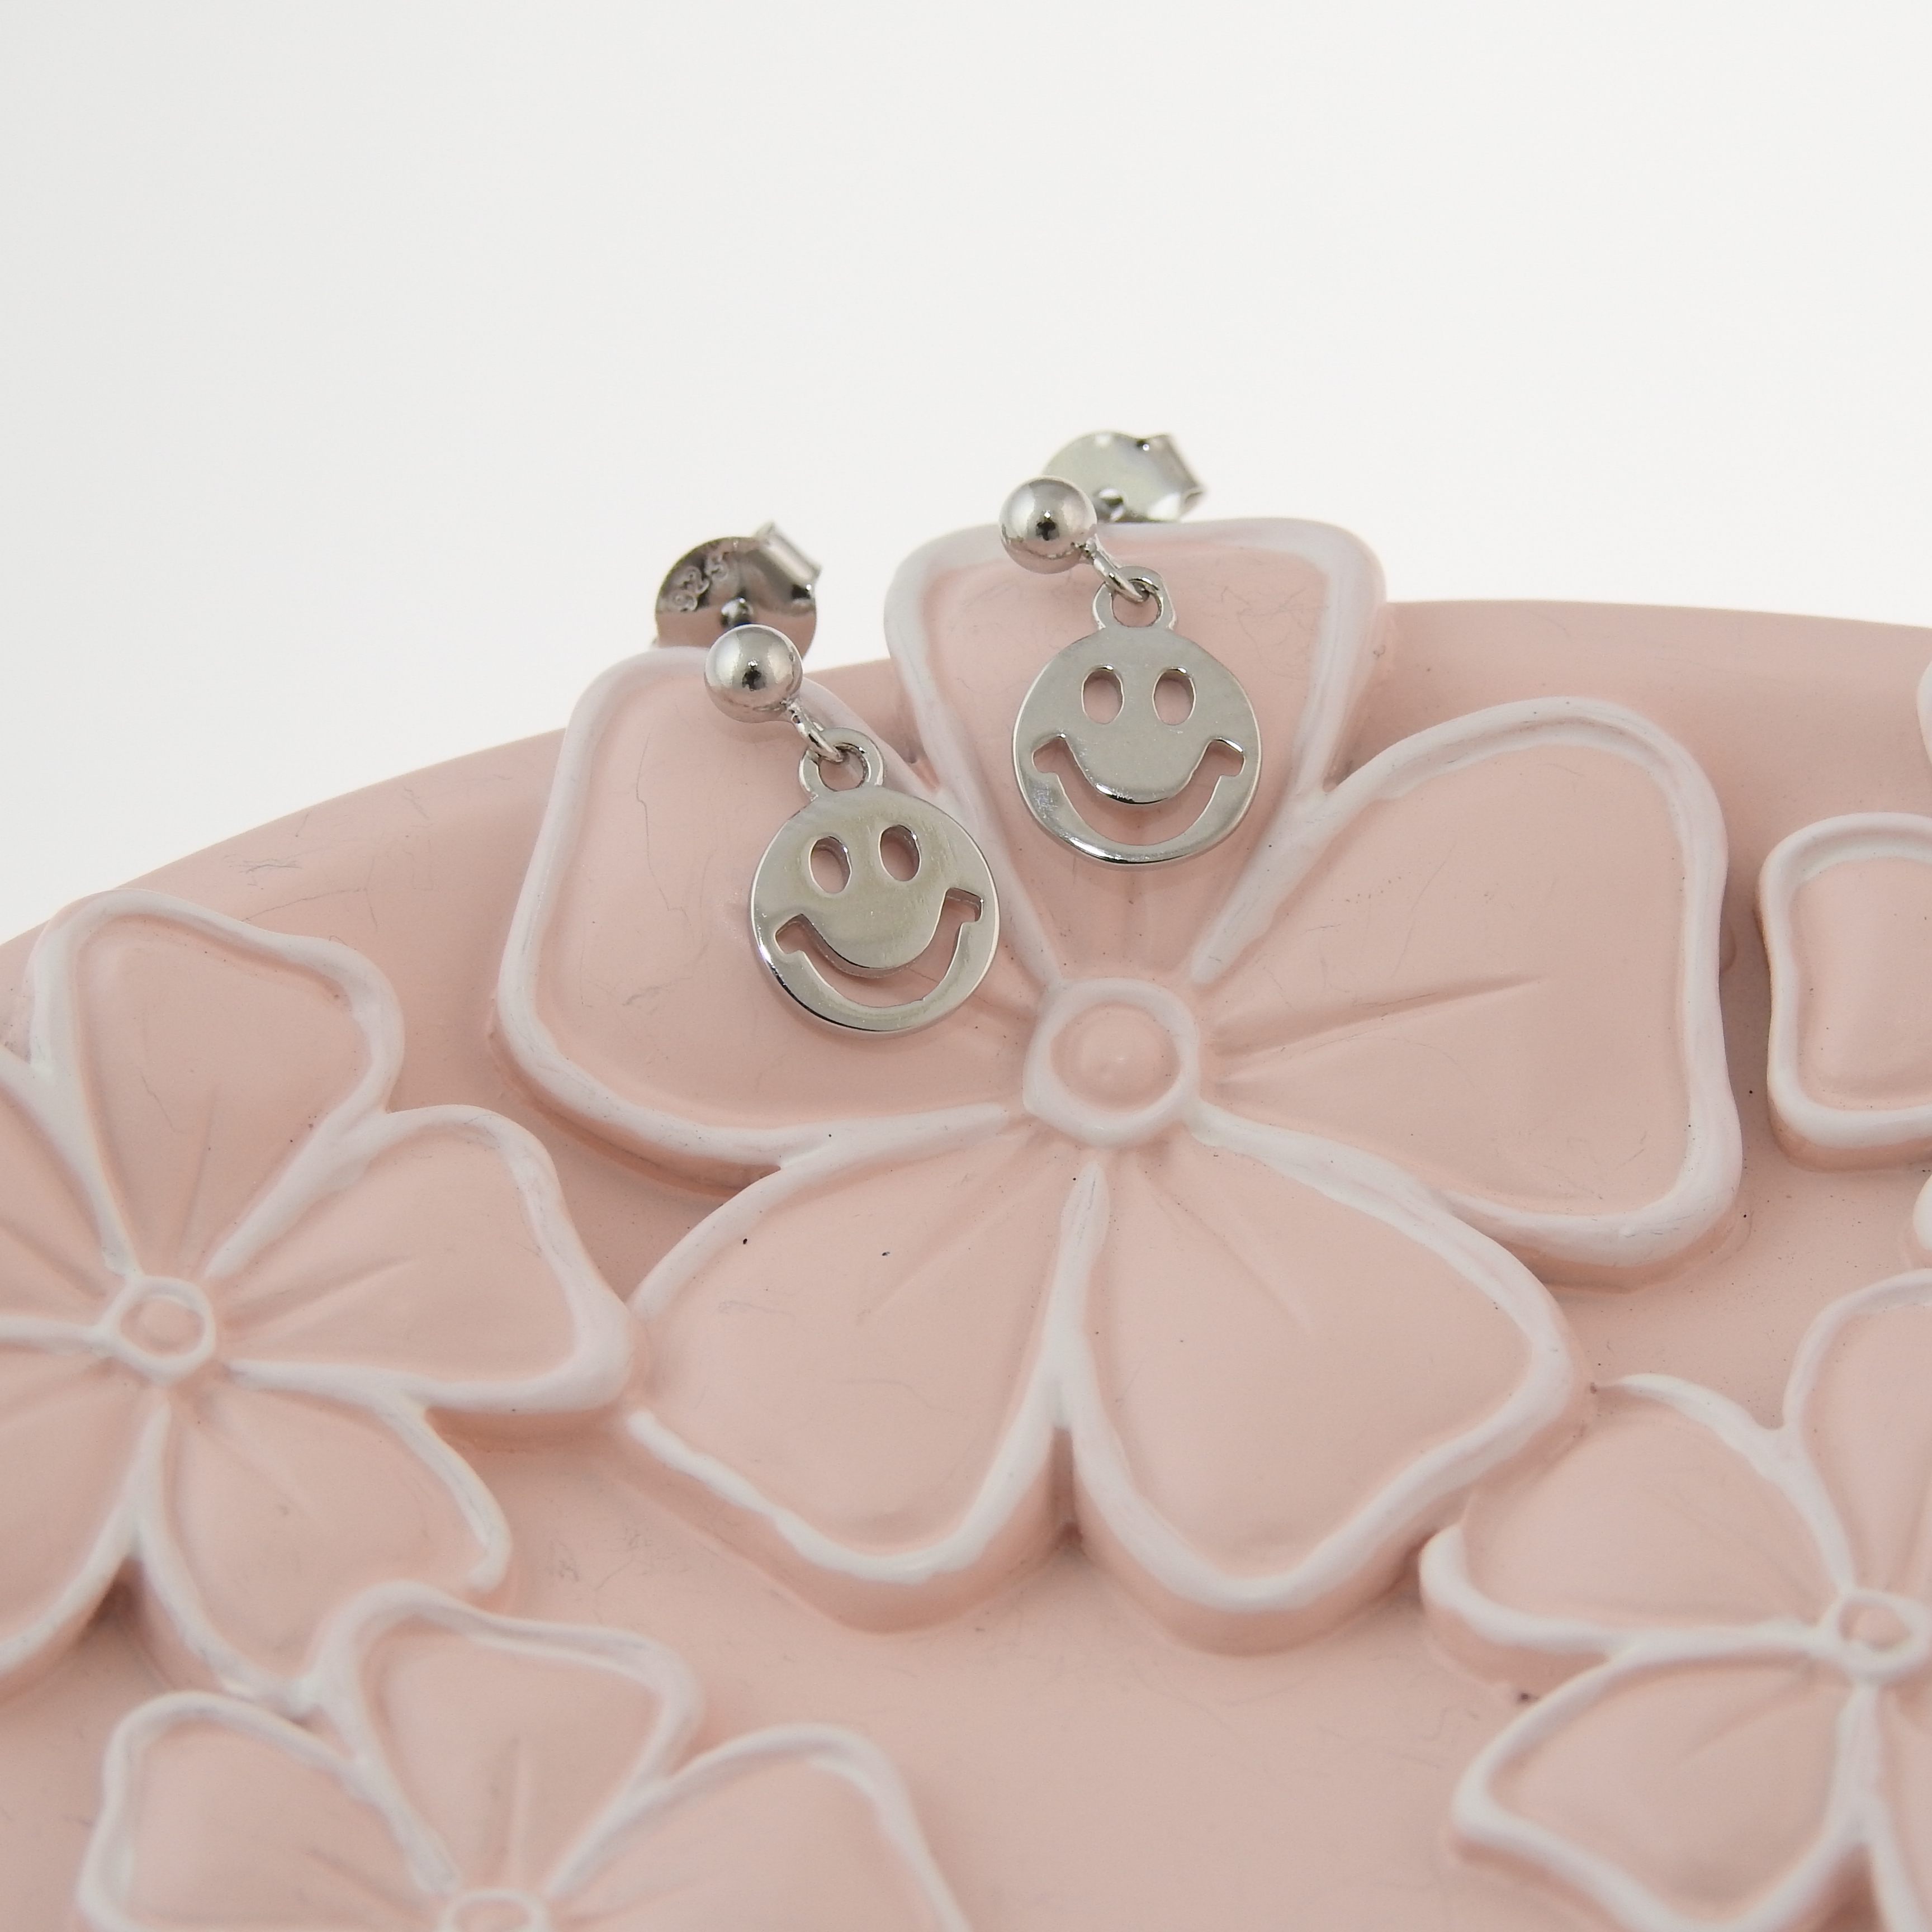 Smiley earrings with rhodium-plated silver 925 crystals